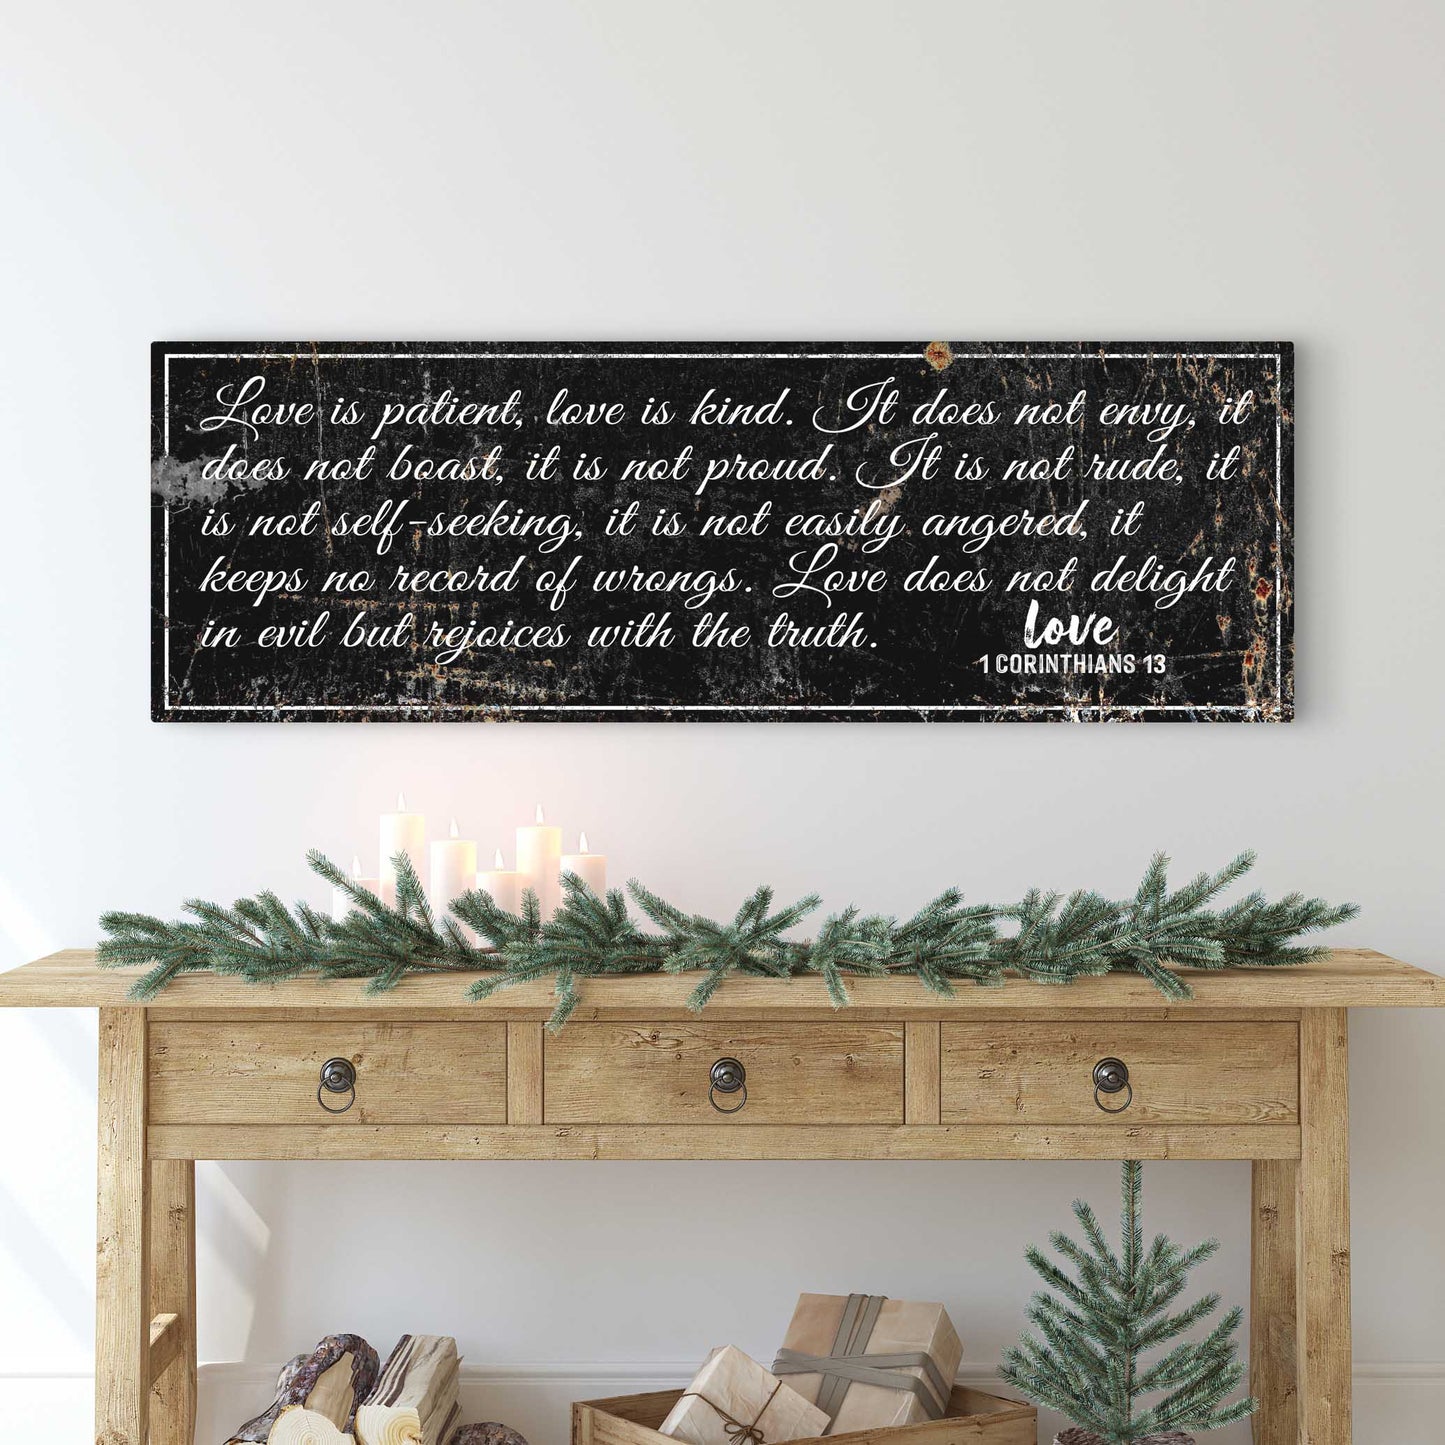 1 Corinthians 13: 'Love Is Patient' - Rustic Christian Wall Art, Religious Decor for Living Room